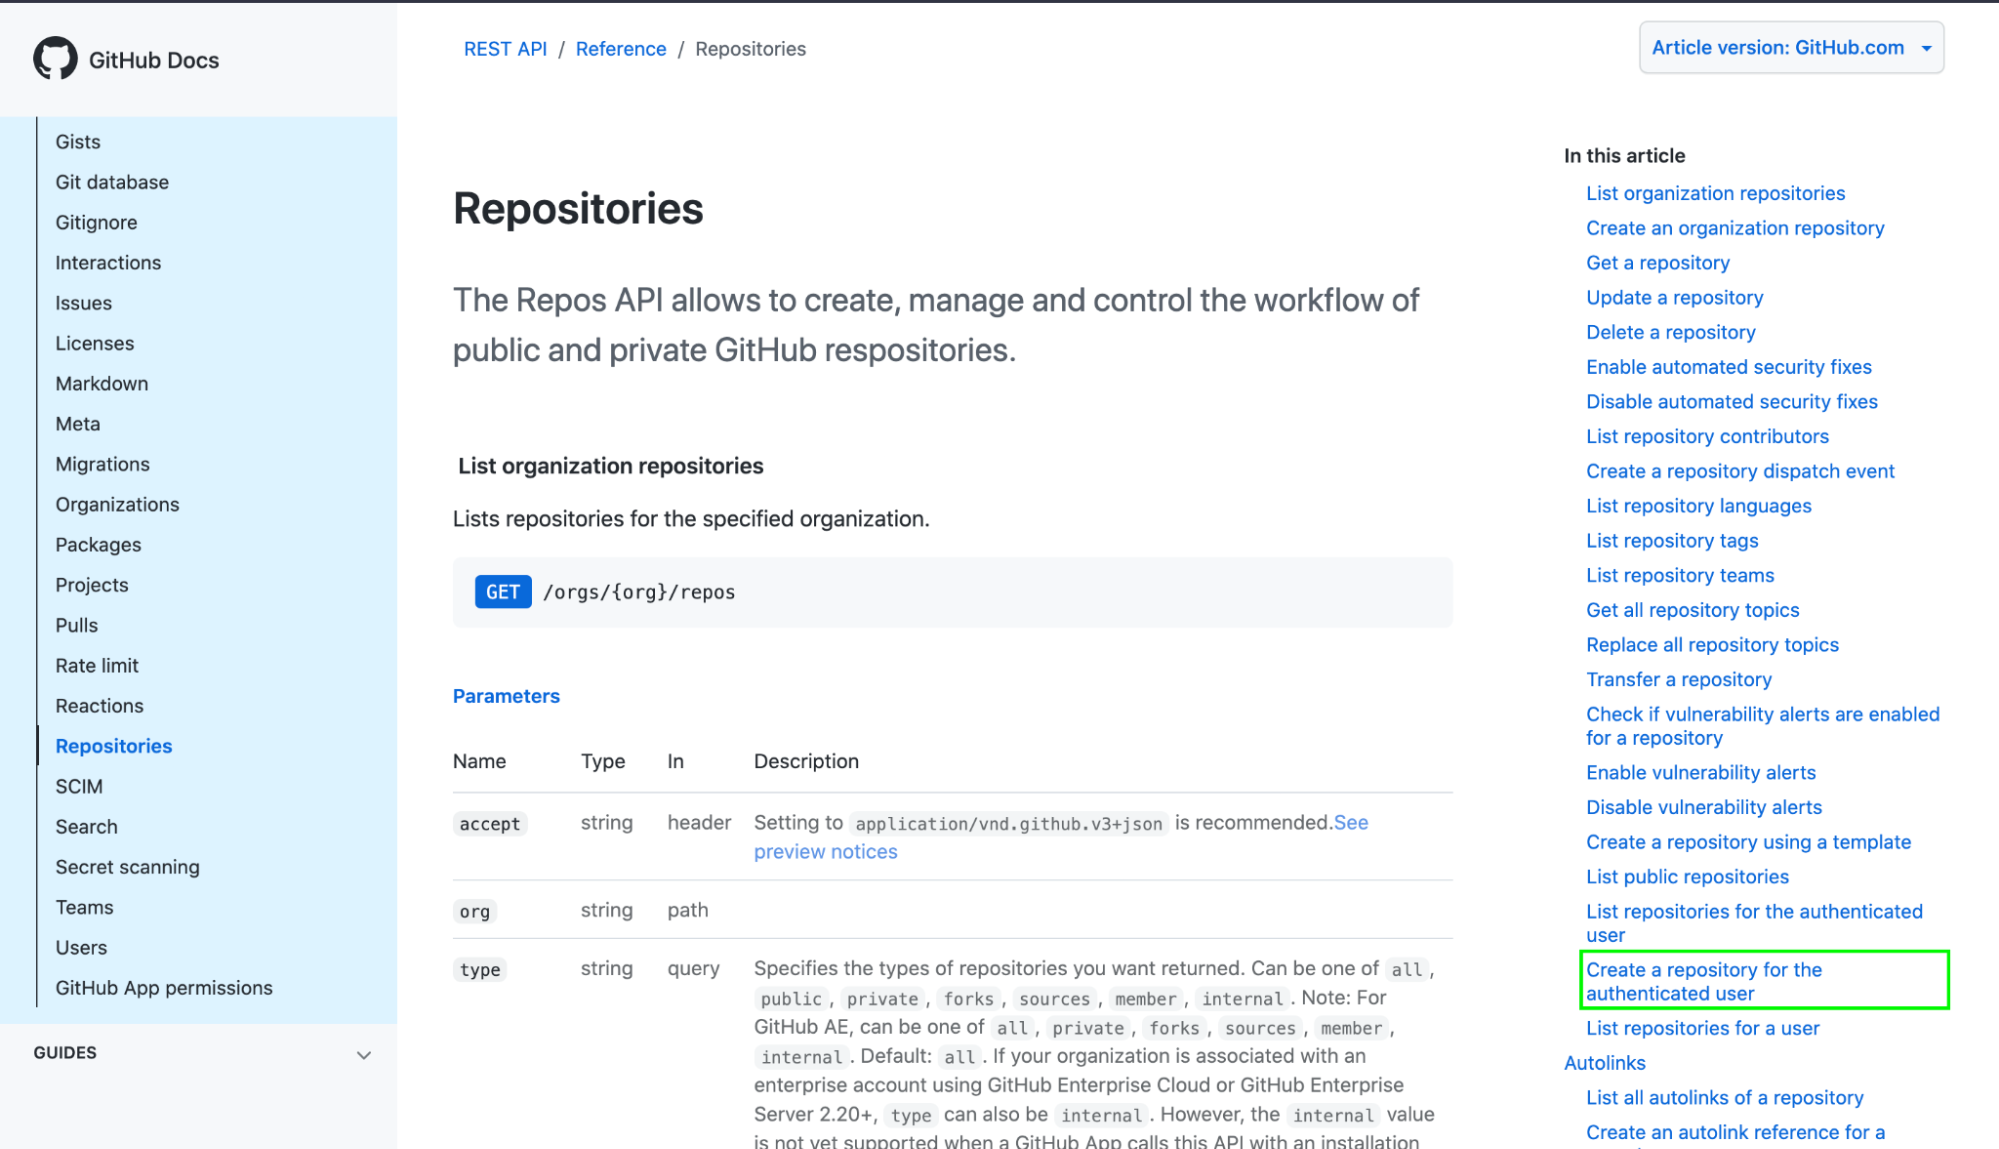 An extract from the GitHub documentation about repositories